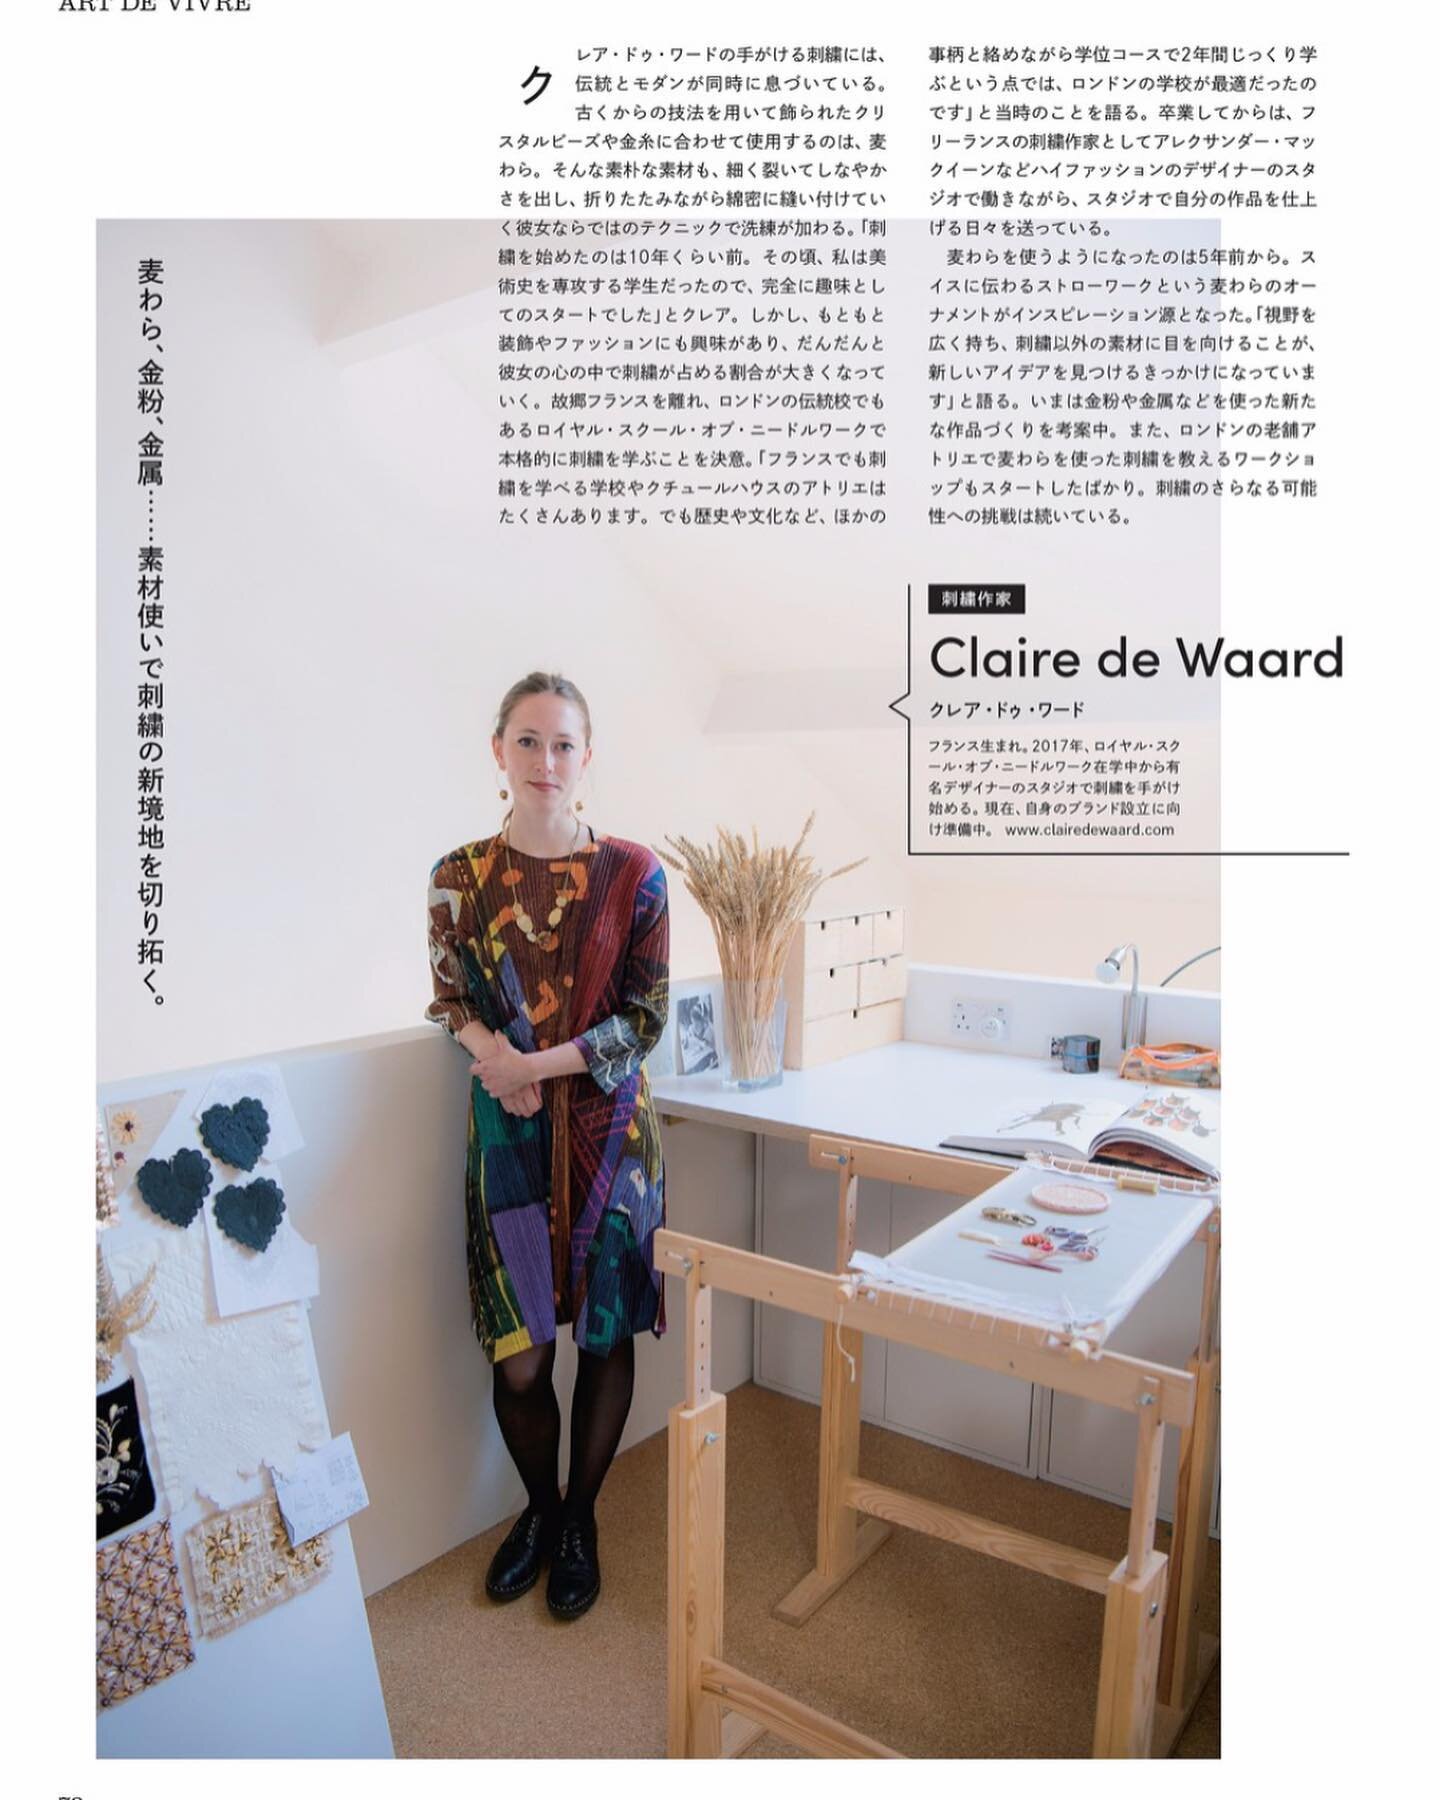 Very honoured to be featured in the last issue of @madamefigarojapon on Beautiful Handicrafts..!

My thanks to Miyuki Sakamoto for getting in touch and writing the article, as well as Miki Yamanouchi for the photos. Had a lovely time welcoming them b